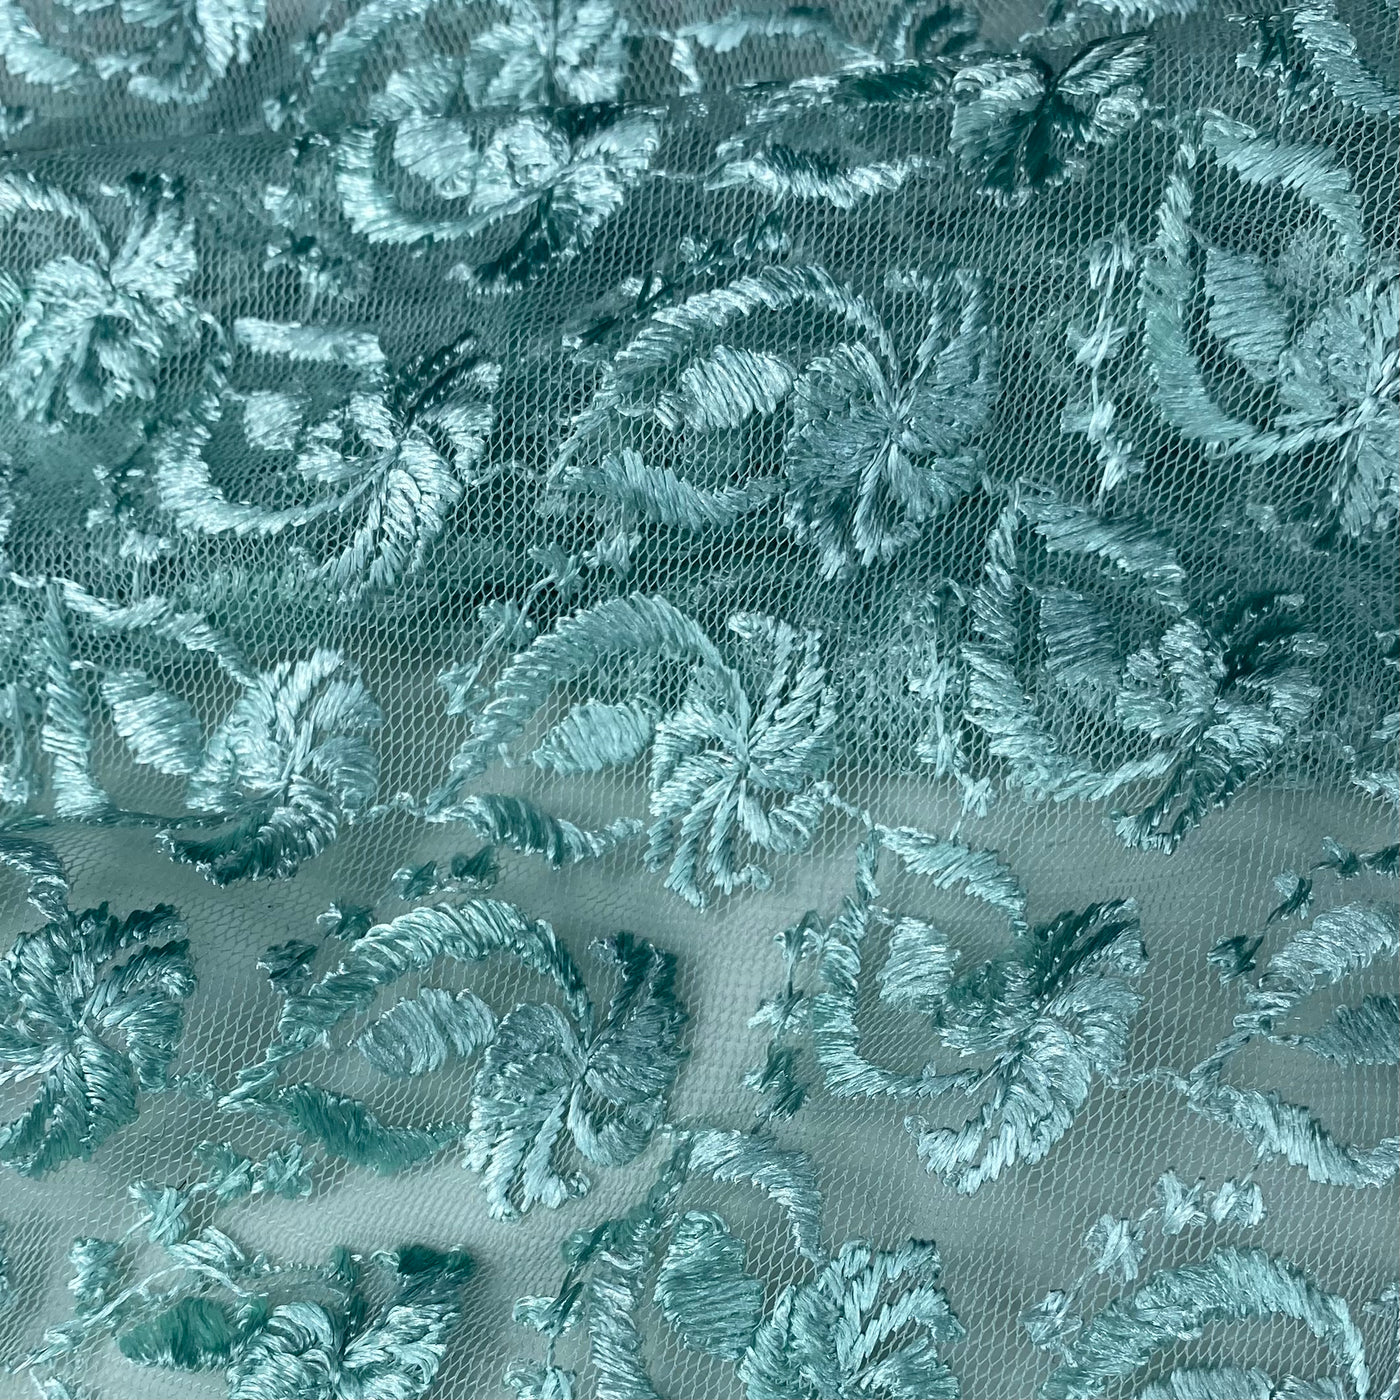 Embroidered Mesh - Mint Green